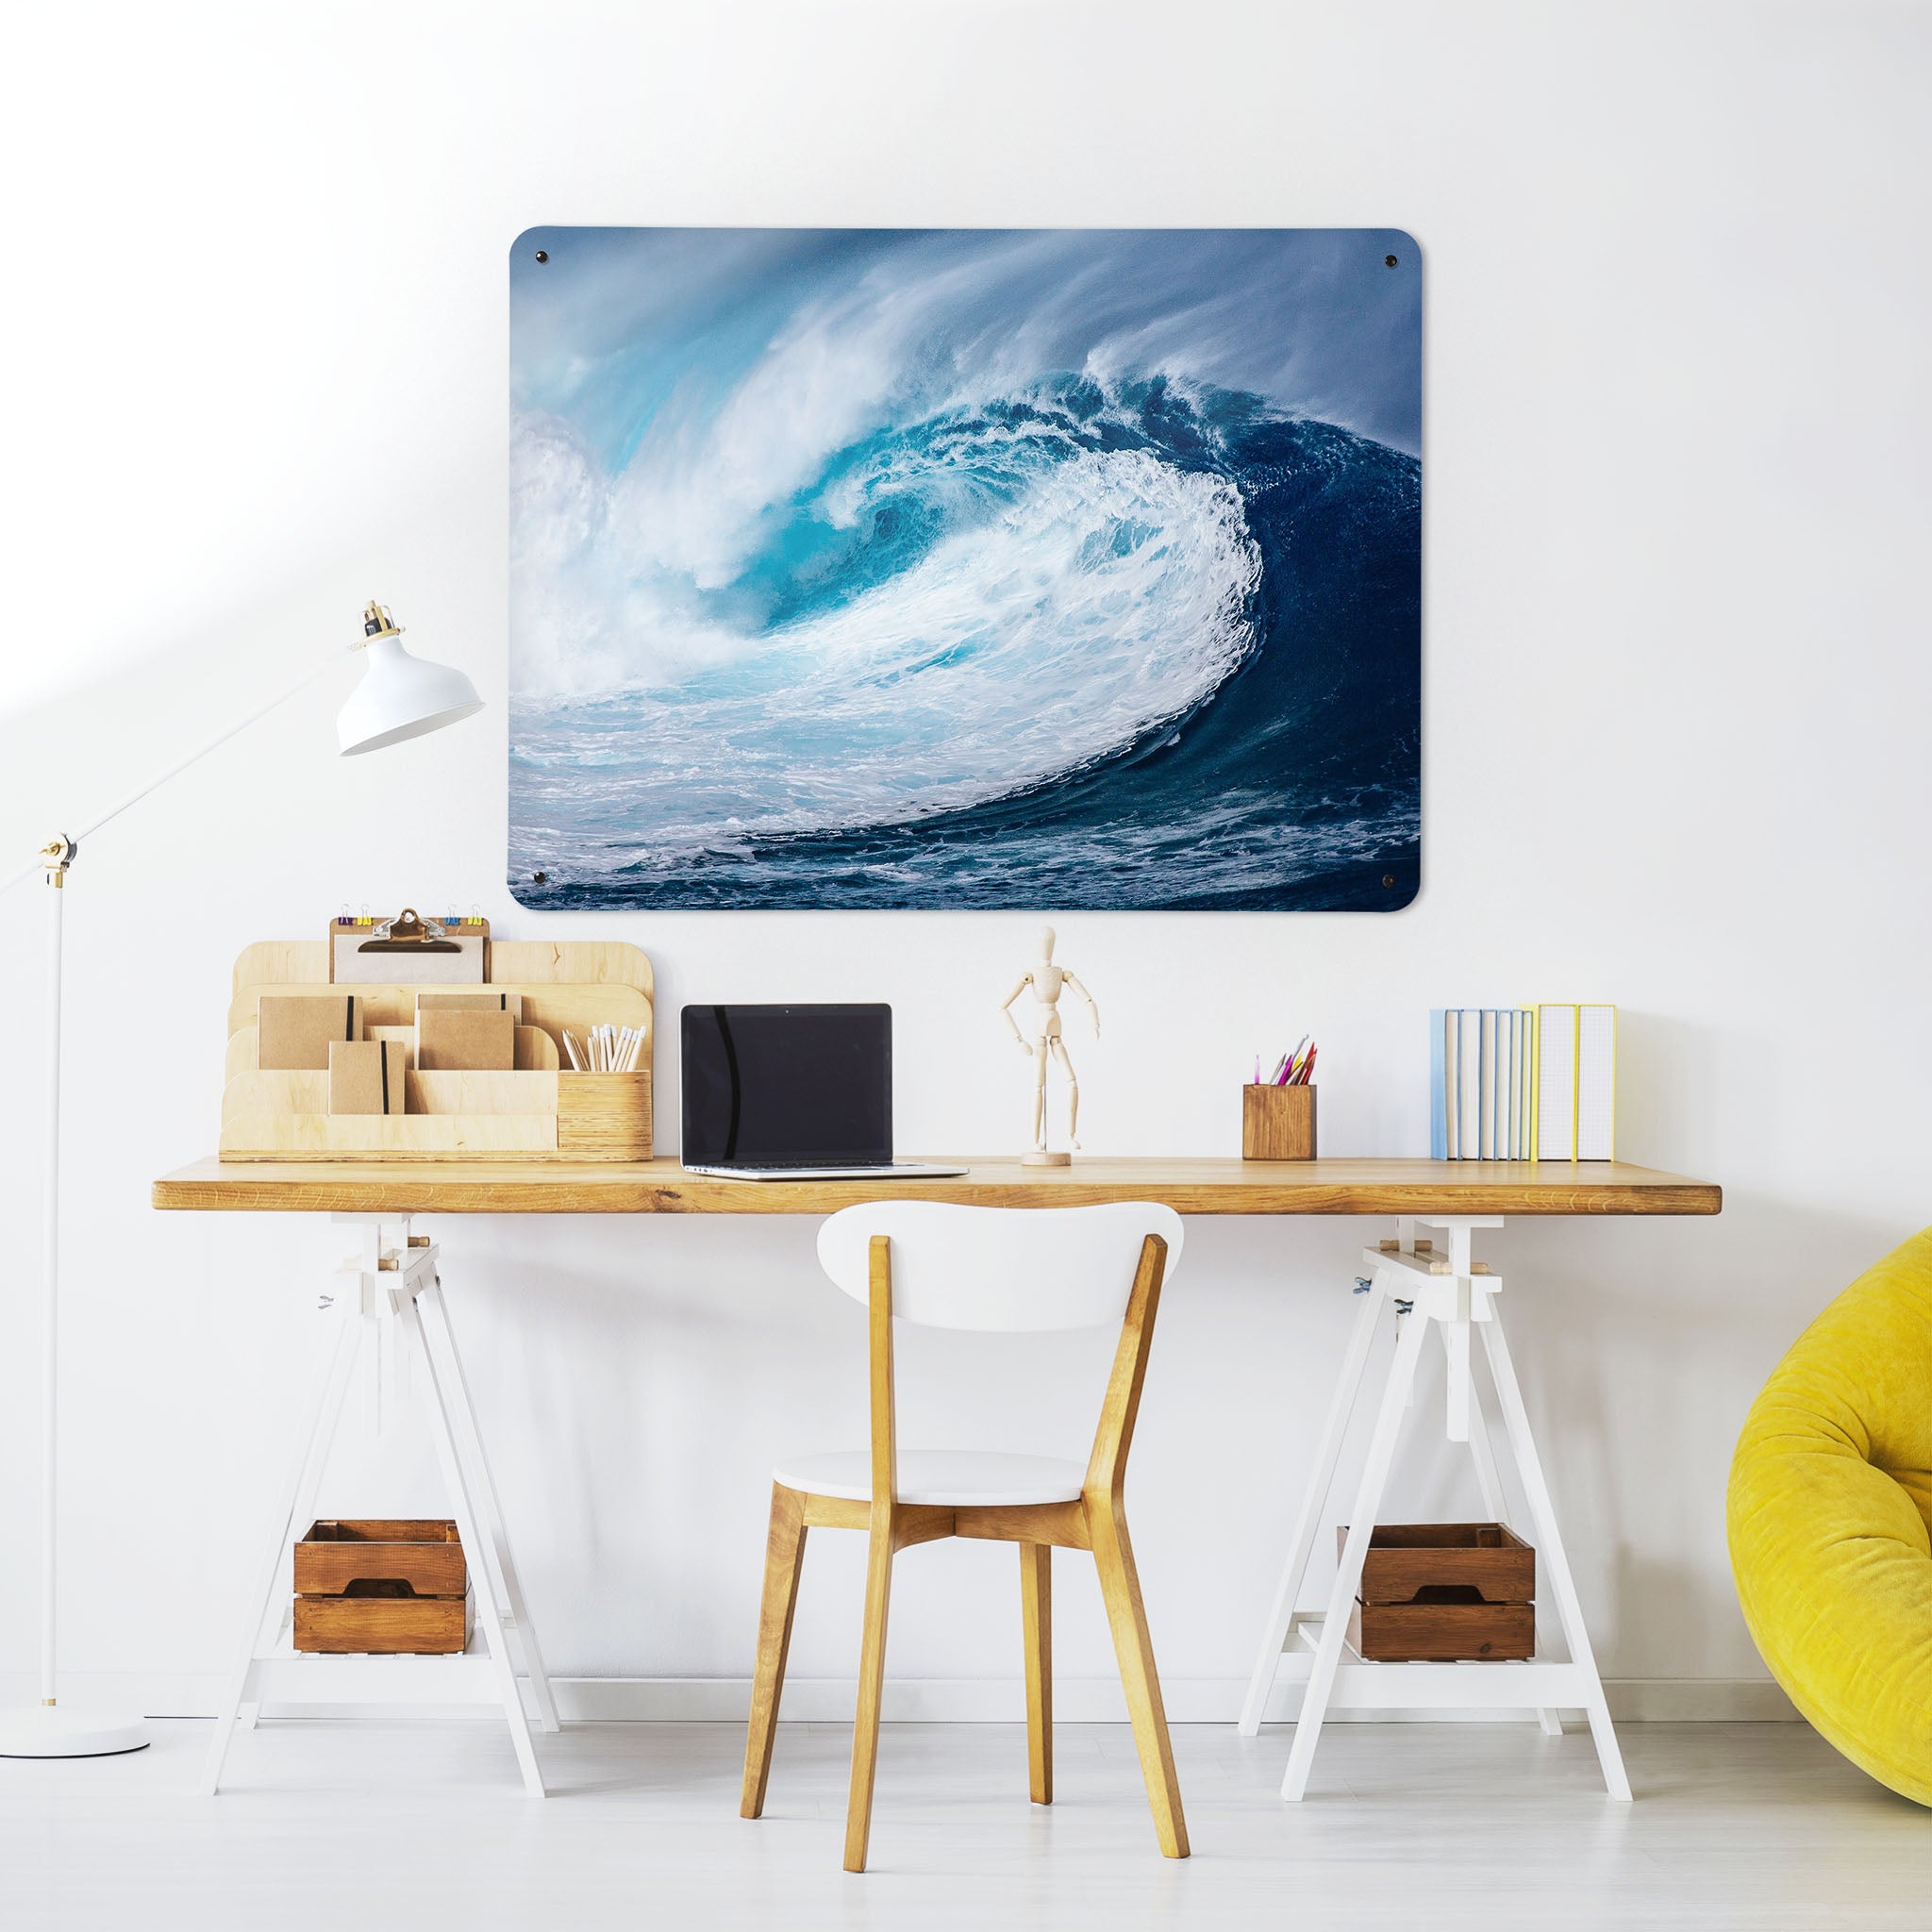 A desk in a workspace setting in a white interior with a magnetic metal wall art panel showing a photograph of a breaking wave